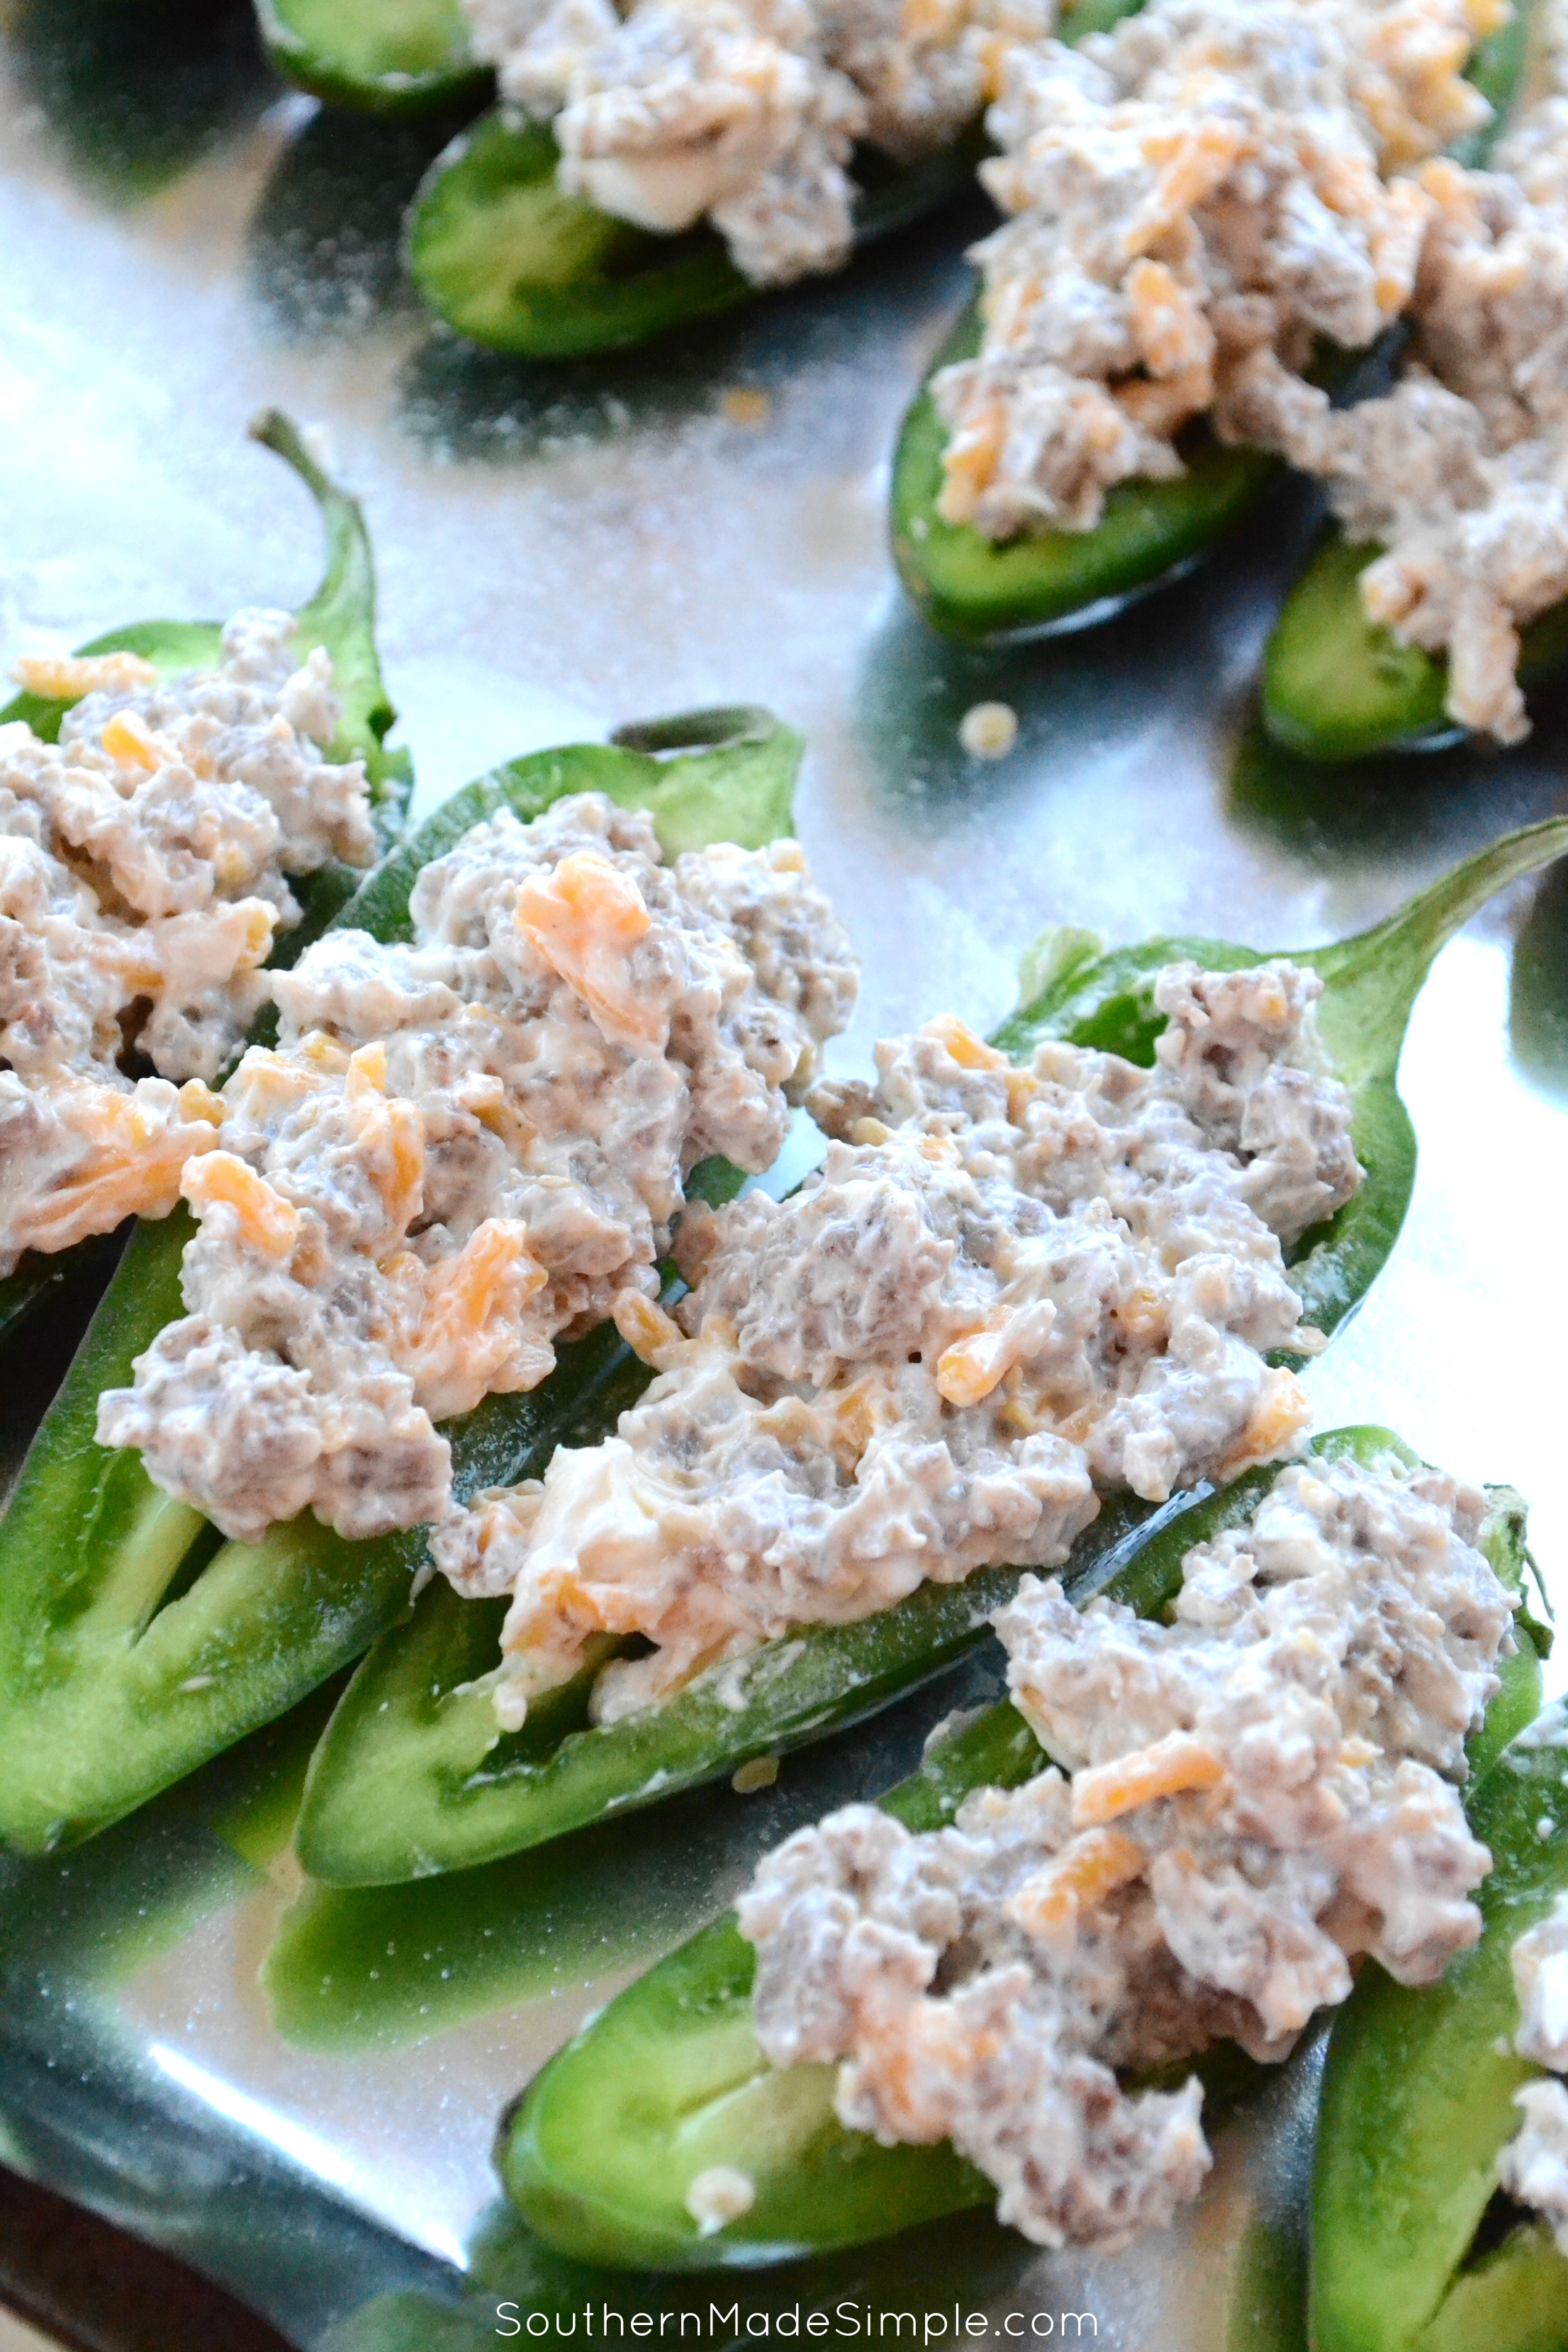 Easy sausage and cream cheese stuffed jalapeno peppers - a crazy easy appetizer that packs a delicious punch of heat!